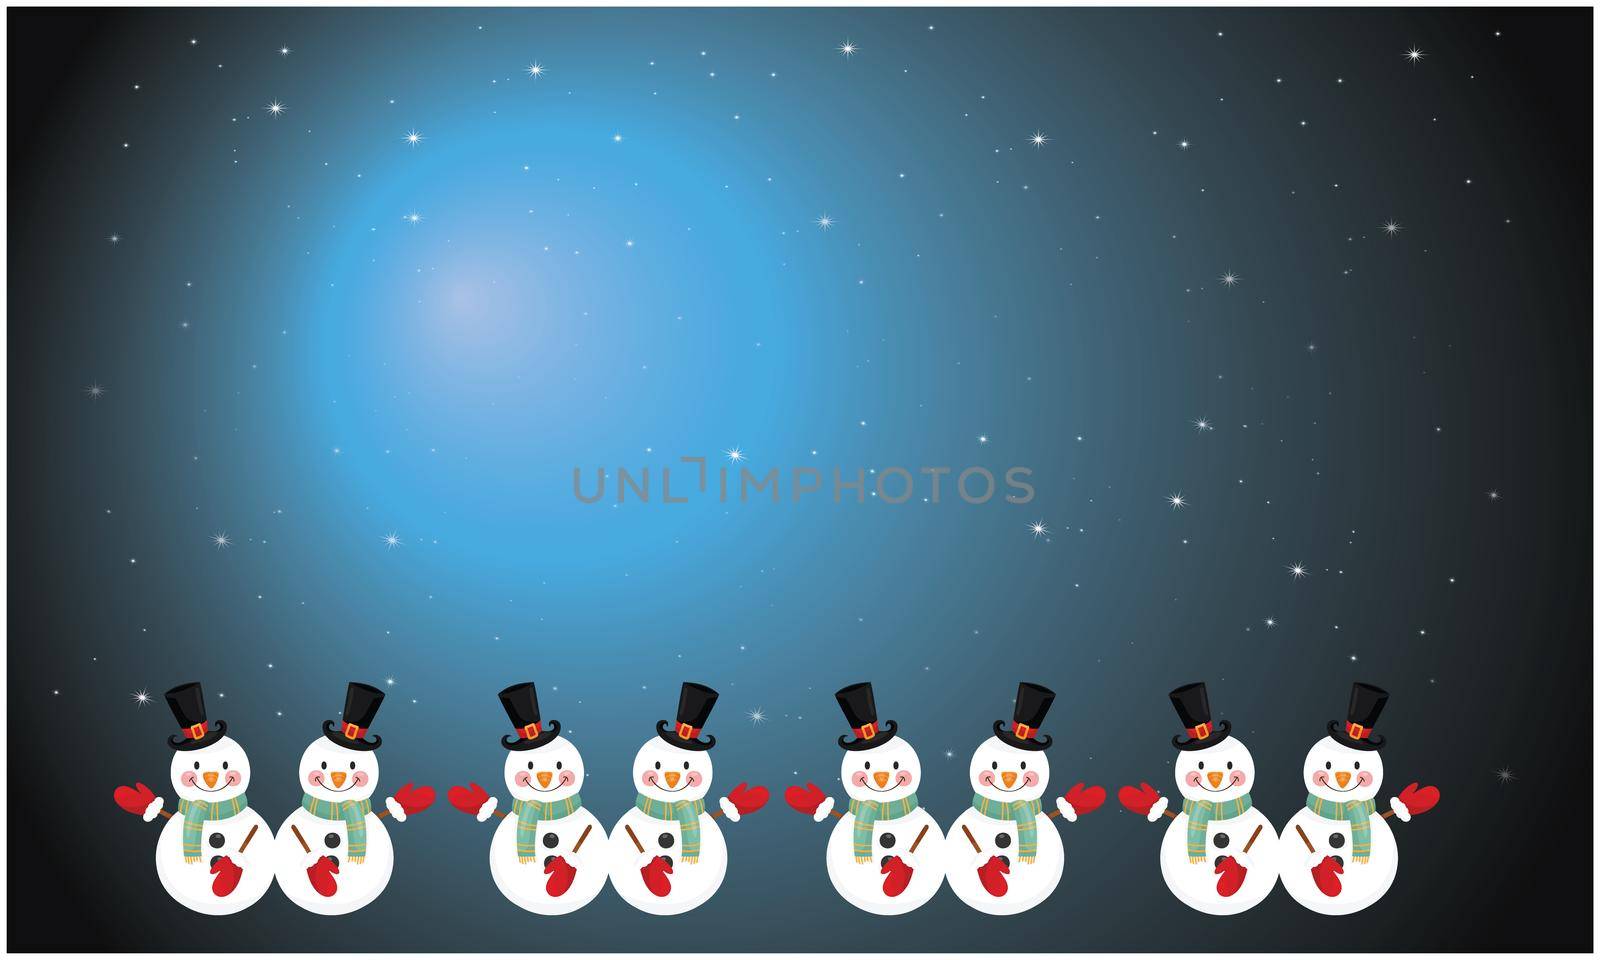 several snowman in an abstract moon night background by aanavcreationsplus